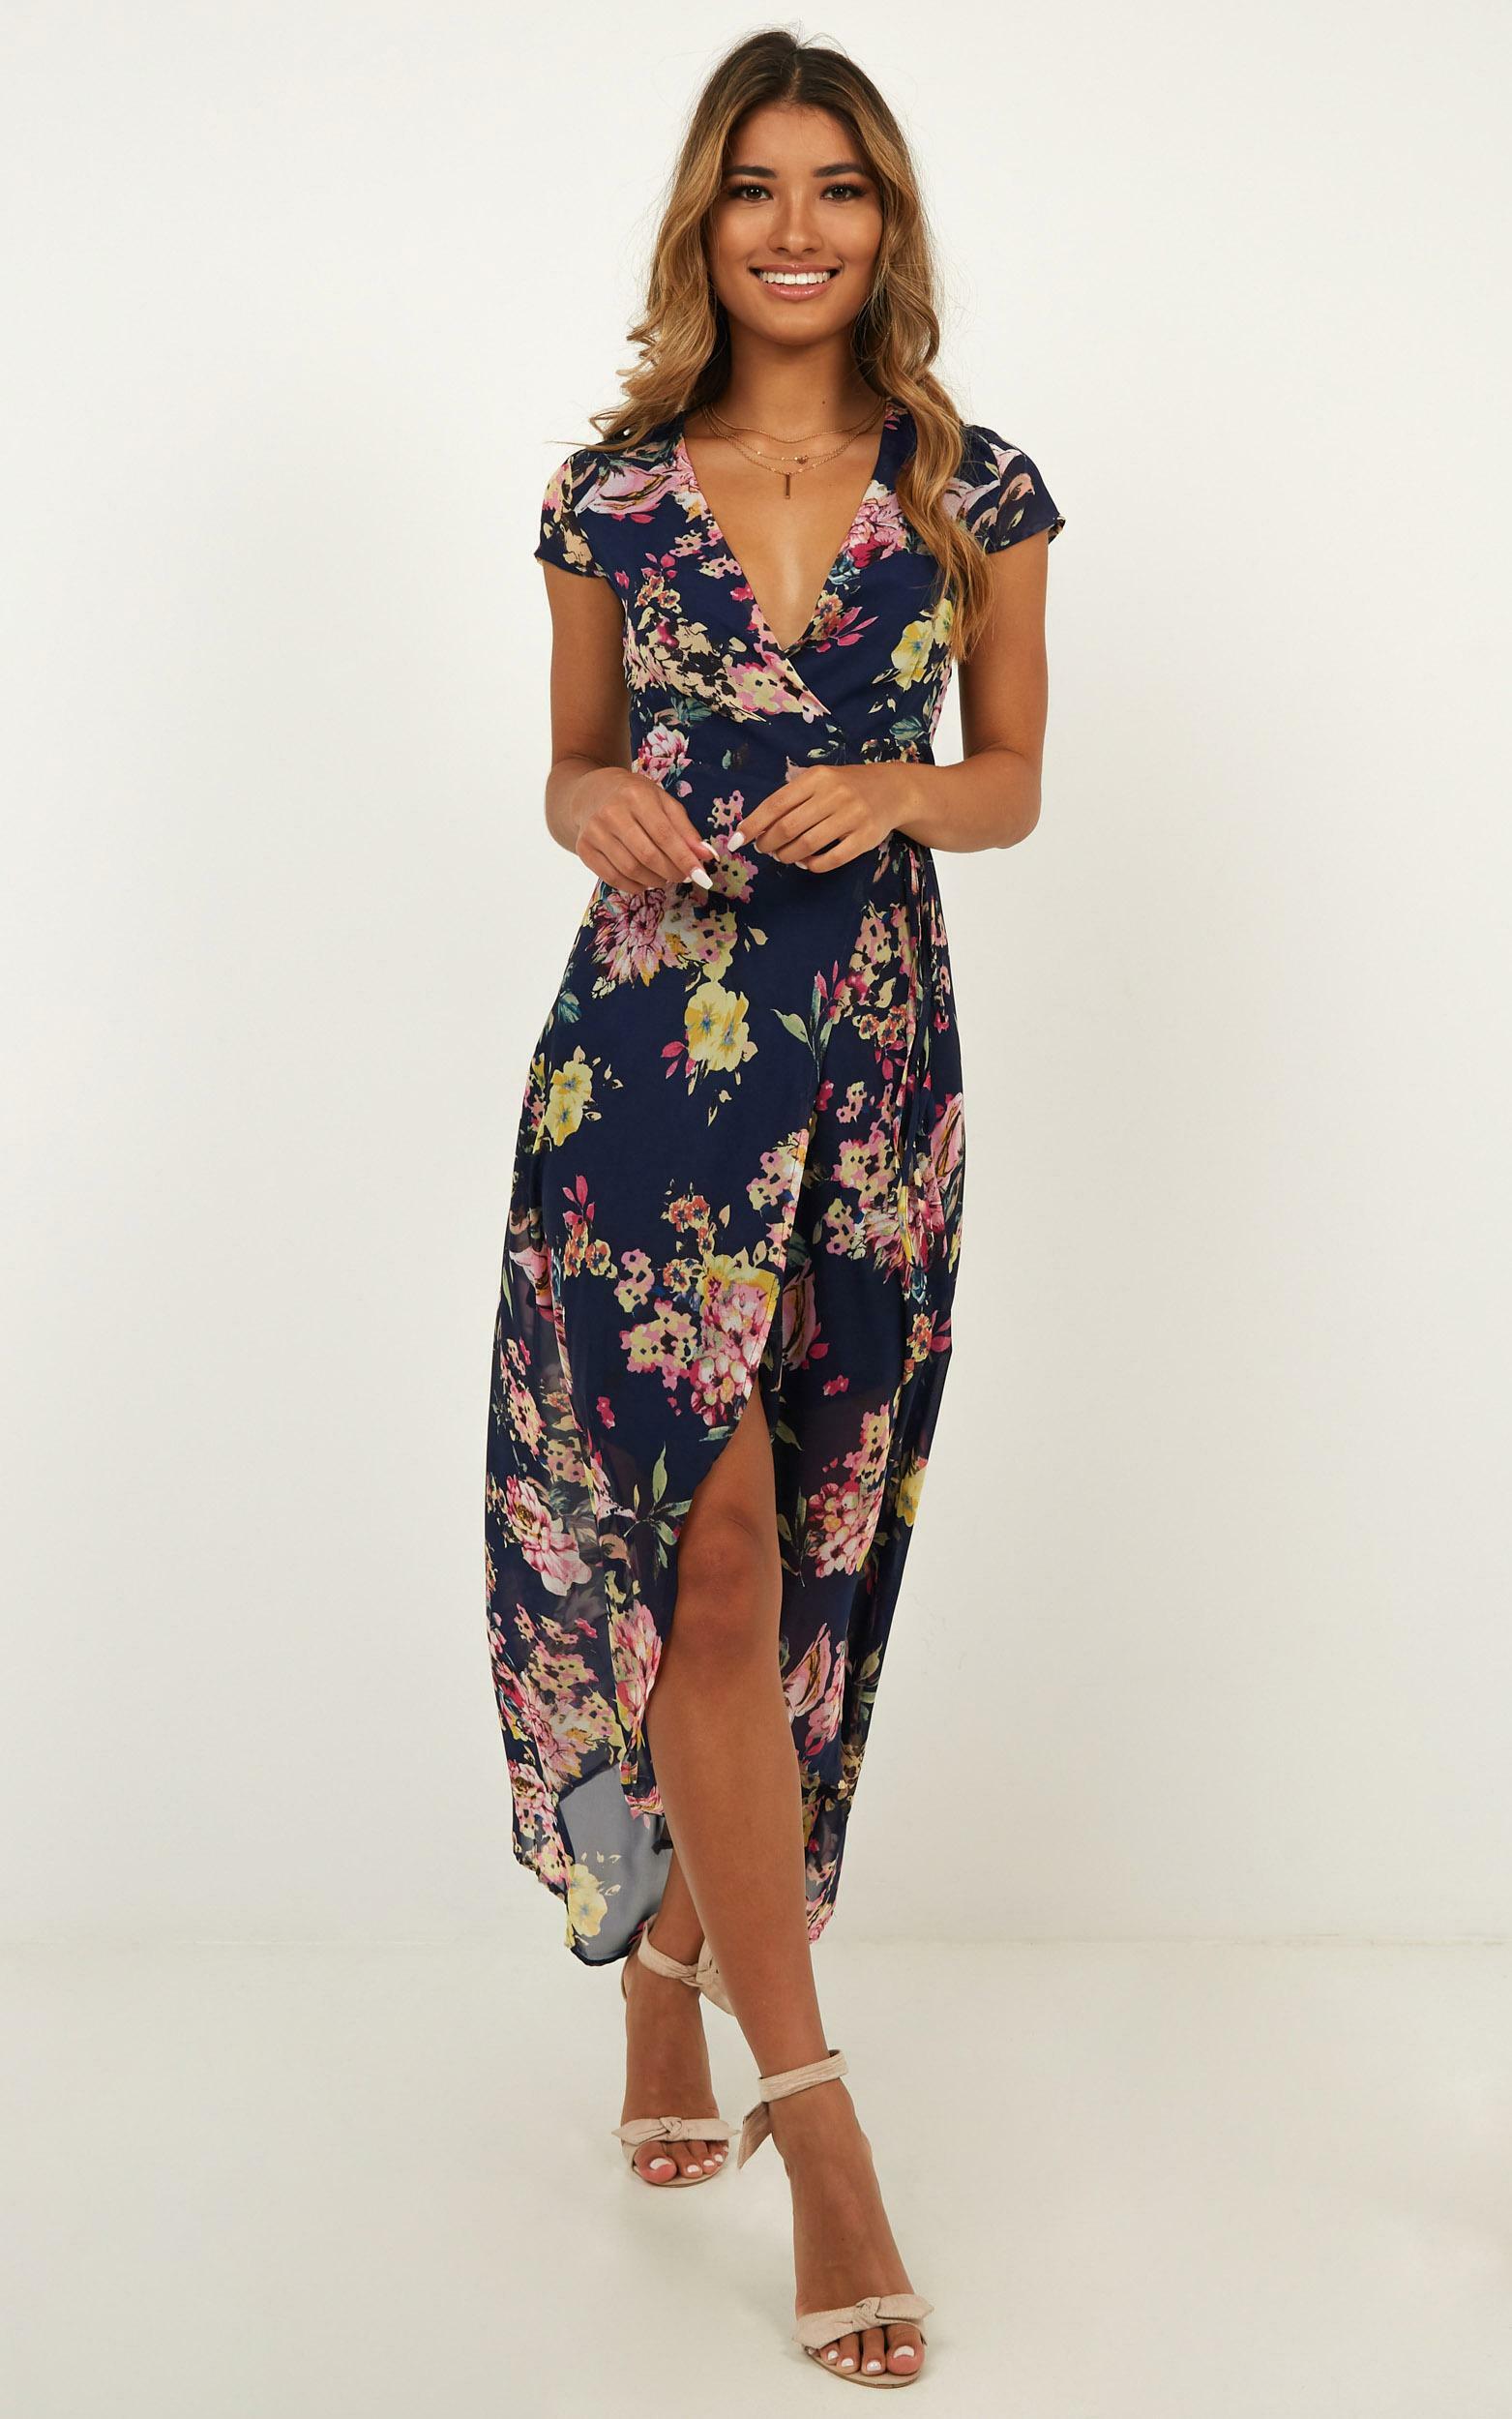 Wrap And Cross Maxi Dress in Navy Floral - 6 (XS), NVY1, hi-res image number null